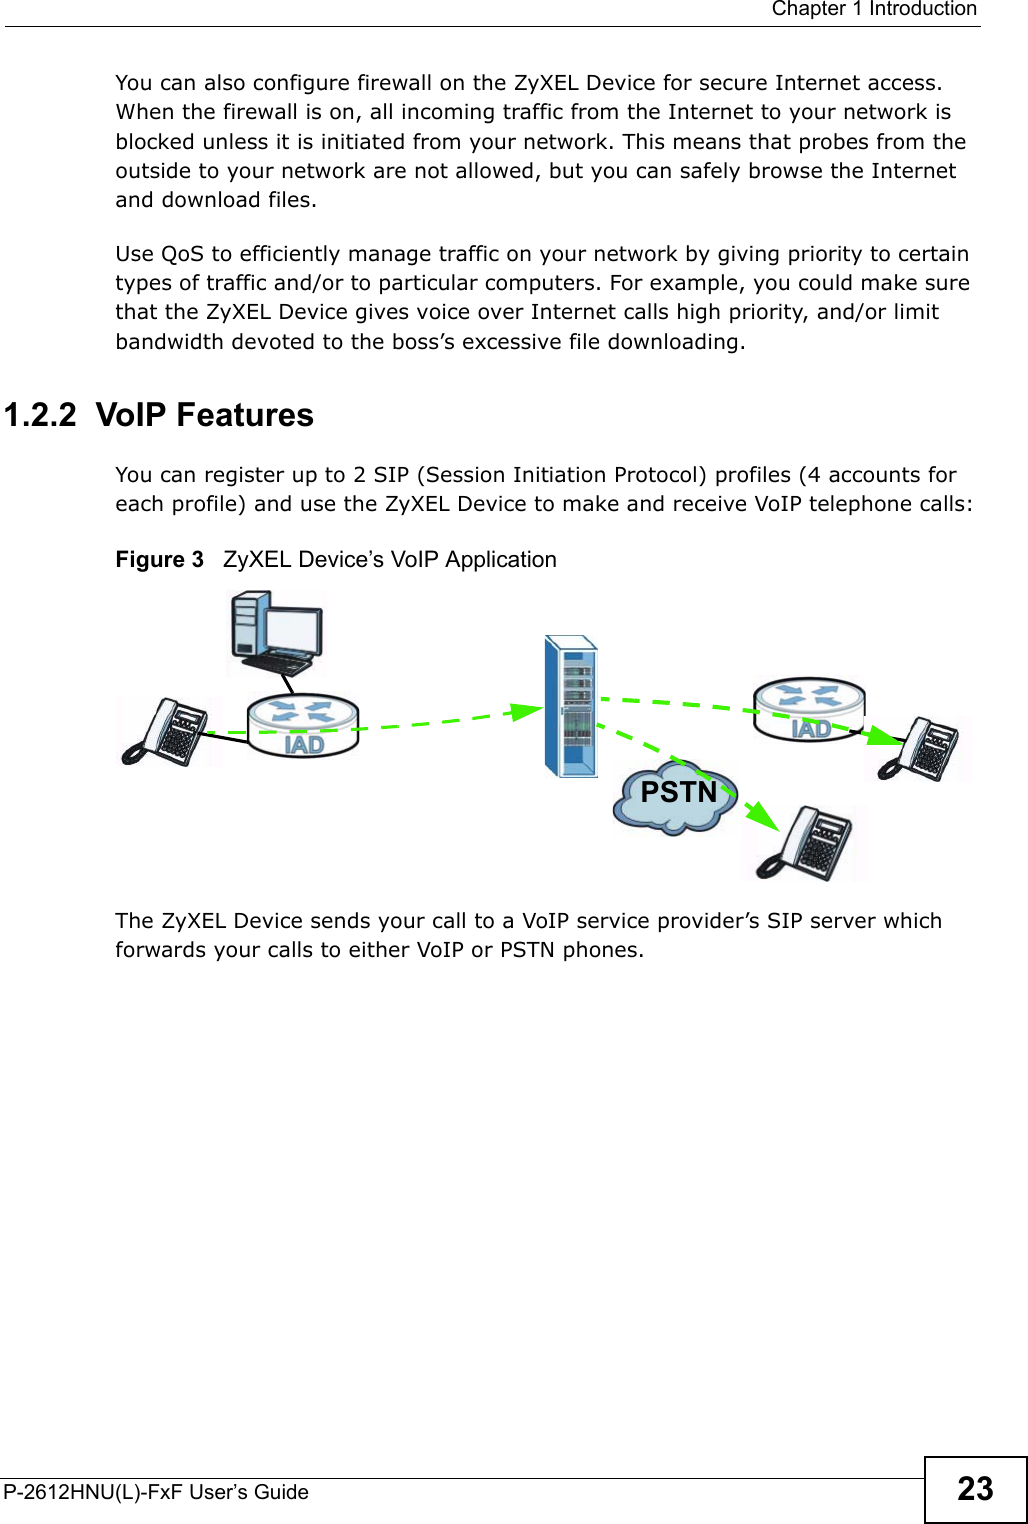  Chapter 1 IntroductionP-2612HNU(L)-FxF User’s Guide 23You can also configure firewall on the ZyXEL Device for secure Internet access.When the firewall is on, all incoming traffic from the Internet to your network isblocked unless it is initiated from your network. This means that probes from theoutside to your network are not allowed, but you can safely browse the Internet and download files.Use QoS to efficiently manage traffic on your network by giving priority to certain types of traffic and/or to particular computers. For example, you could make sure that the ZyXEL Device gives voice over Internet calls high priority, and/or limitbandwidth devoted to the boss’s excessive file downloading.1.2.2  VoIP FeaturesYou can register up to 2 SIP (Session Initiation Protocol) profiles (4 accounts for each profile) and use the ZyXEL Device to make and receive VoIP telephone calls:Figure 3   ZyXEL Device’s VoIP ApplicationThe ZyXEL Device sends your call to a VoIP service provider’s SIP server which forwards your calls to either VoIP or PSTN phones.PSTN